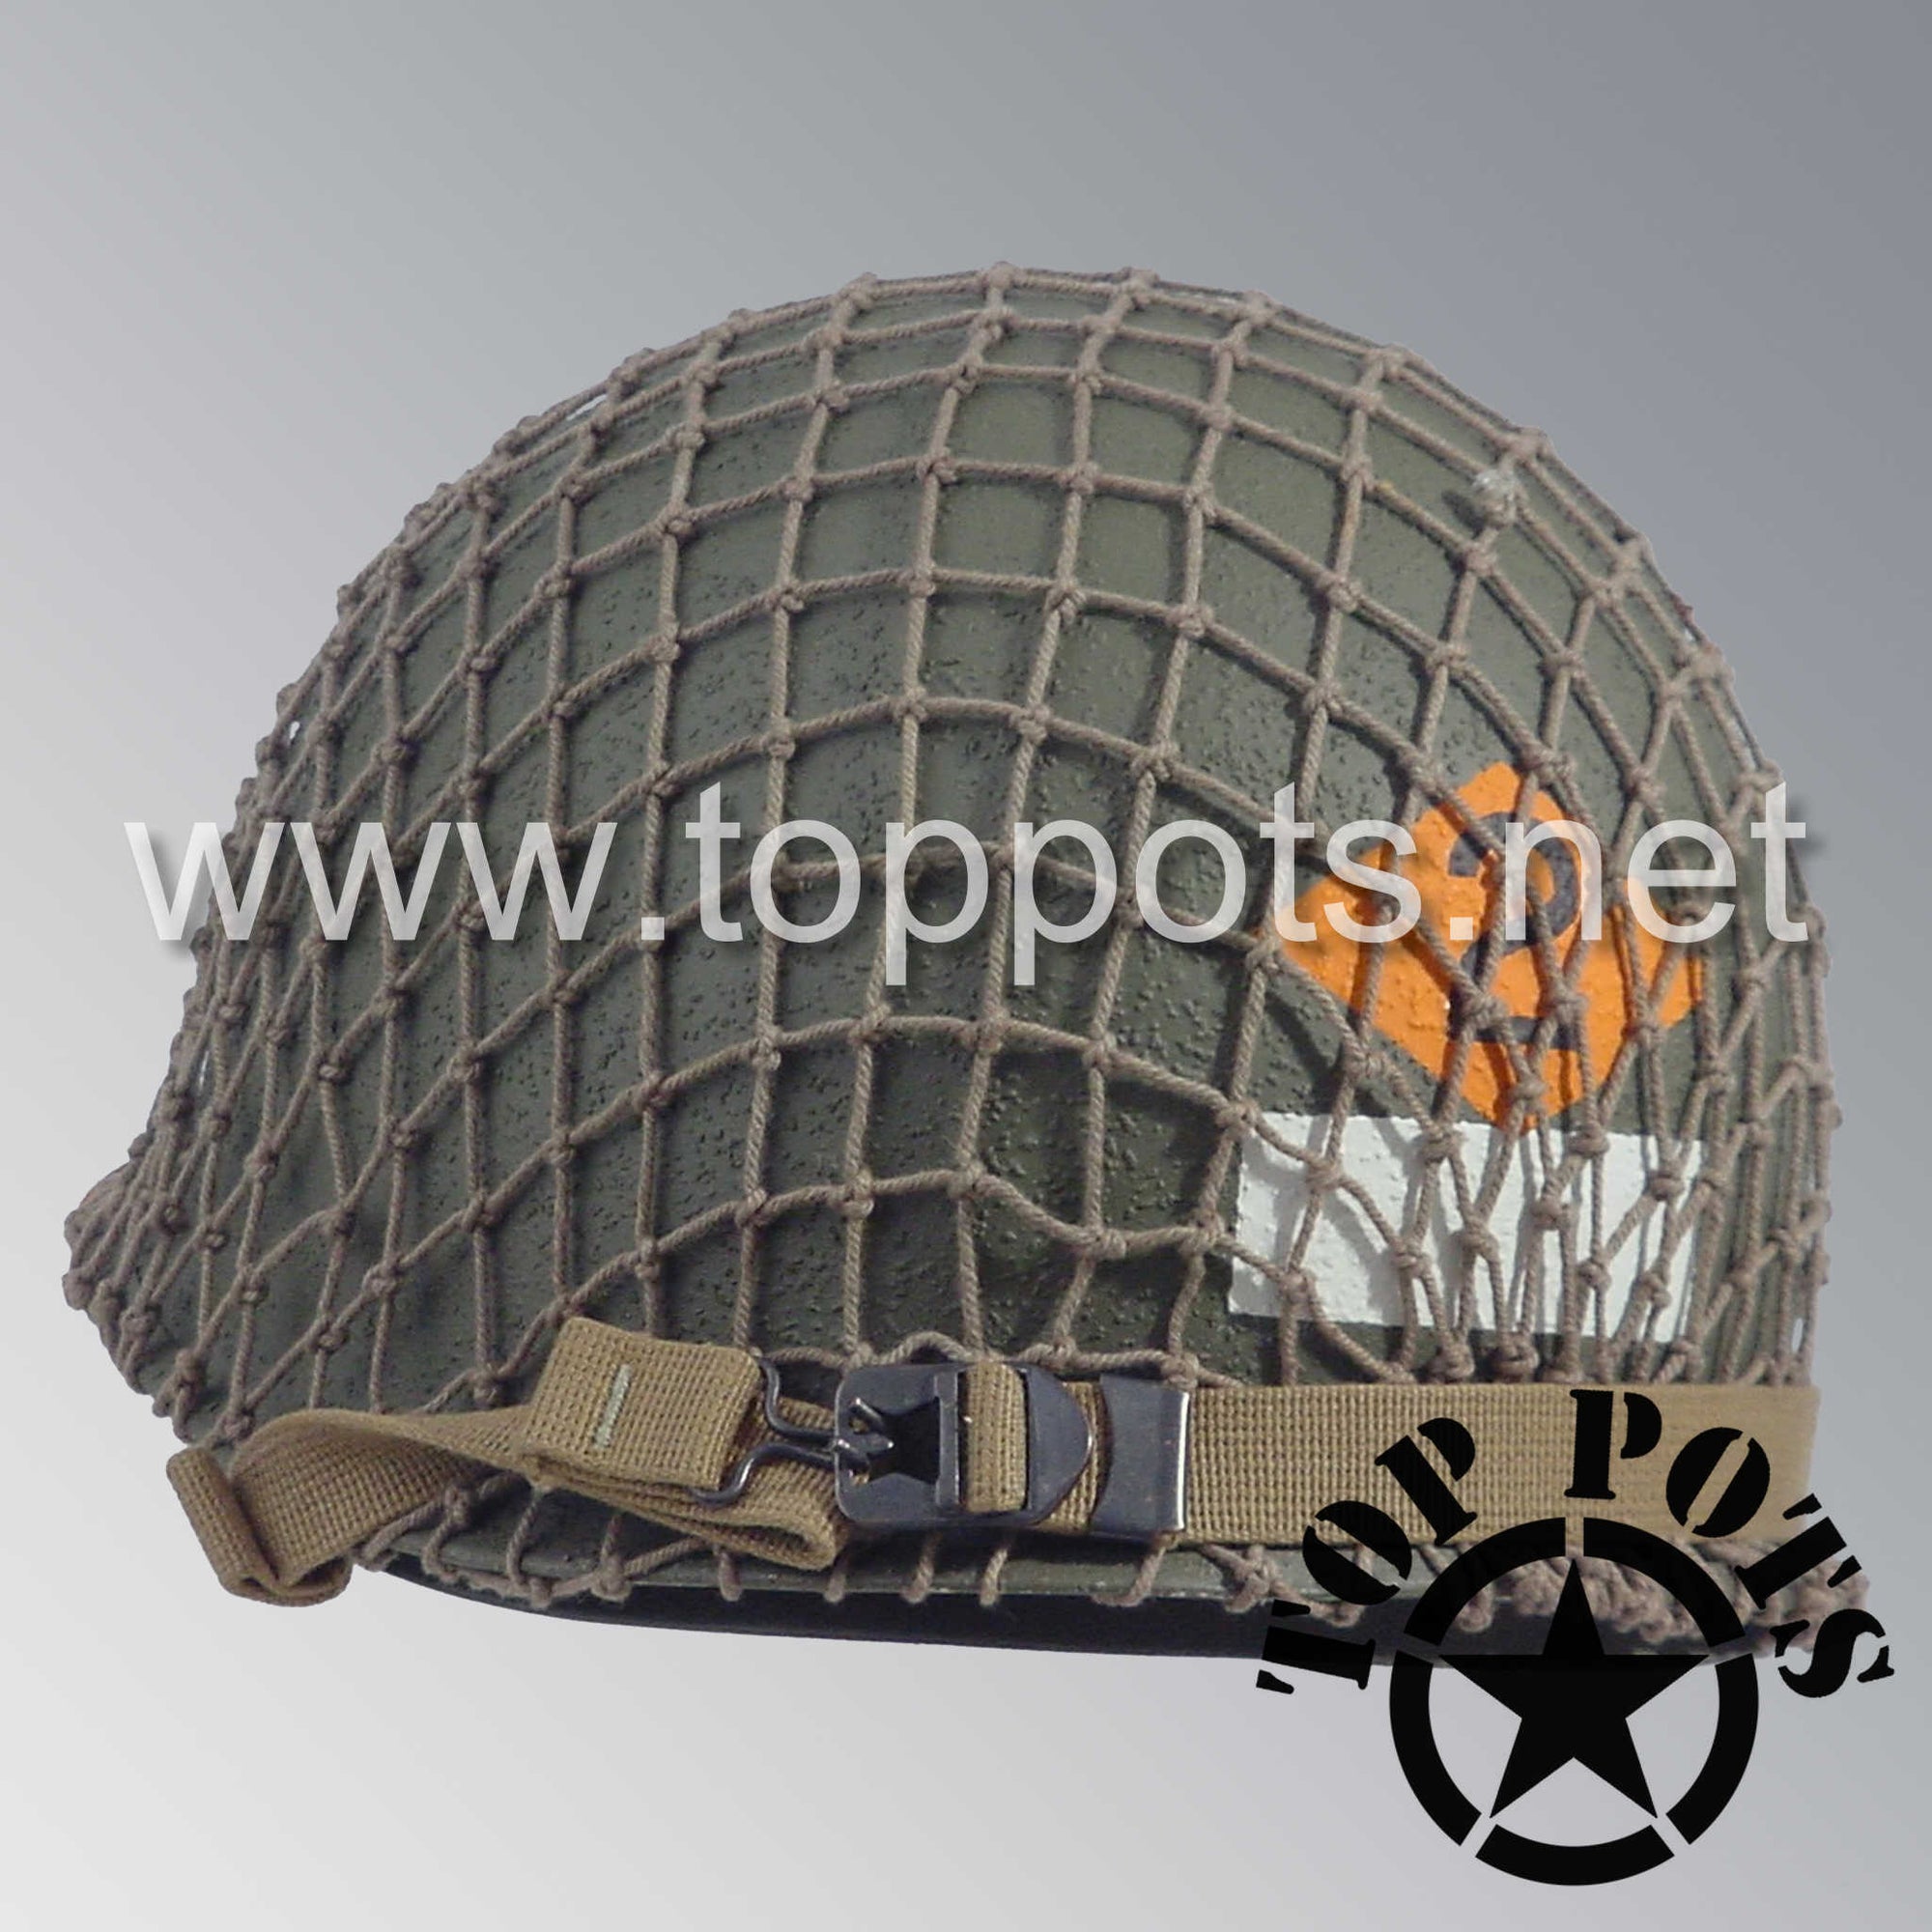 WWII US Army Restored Original M1 Infantry Helmet Swivel Bale Shell and Liner with 2nd Ranger NCO Emblem and Khaki Net